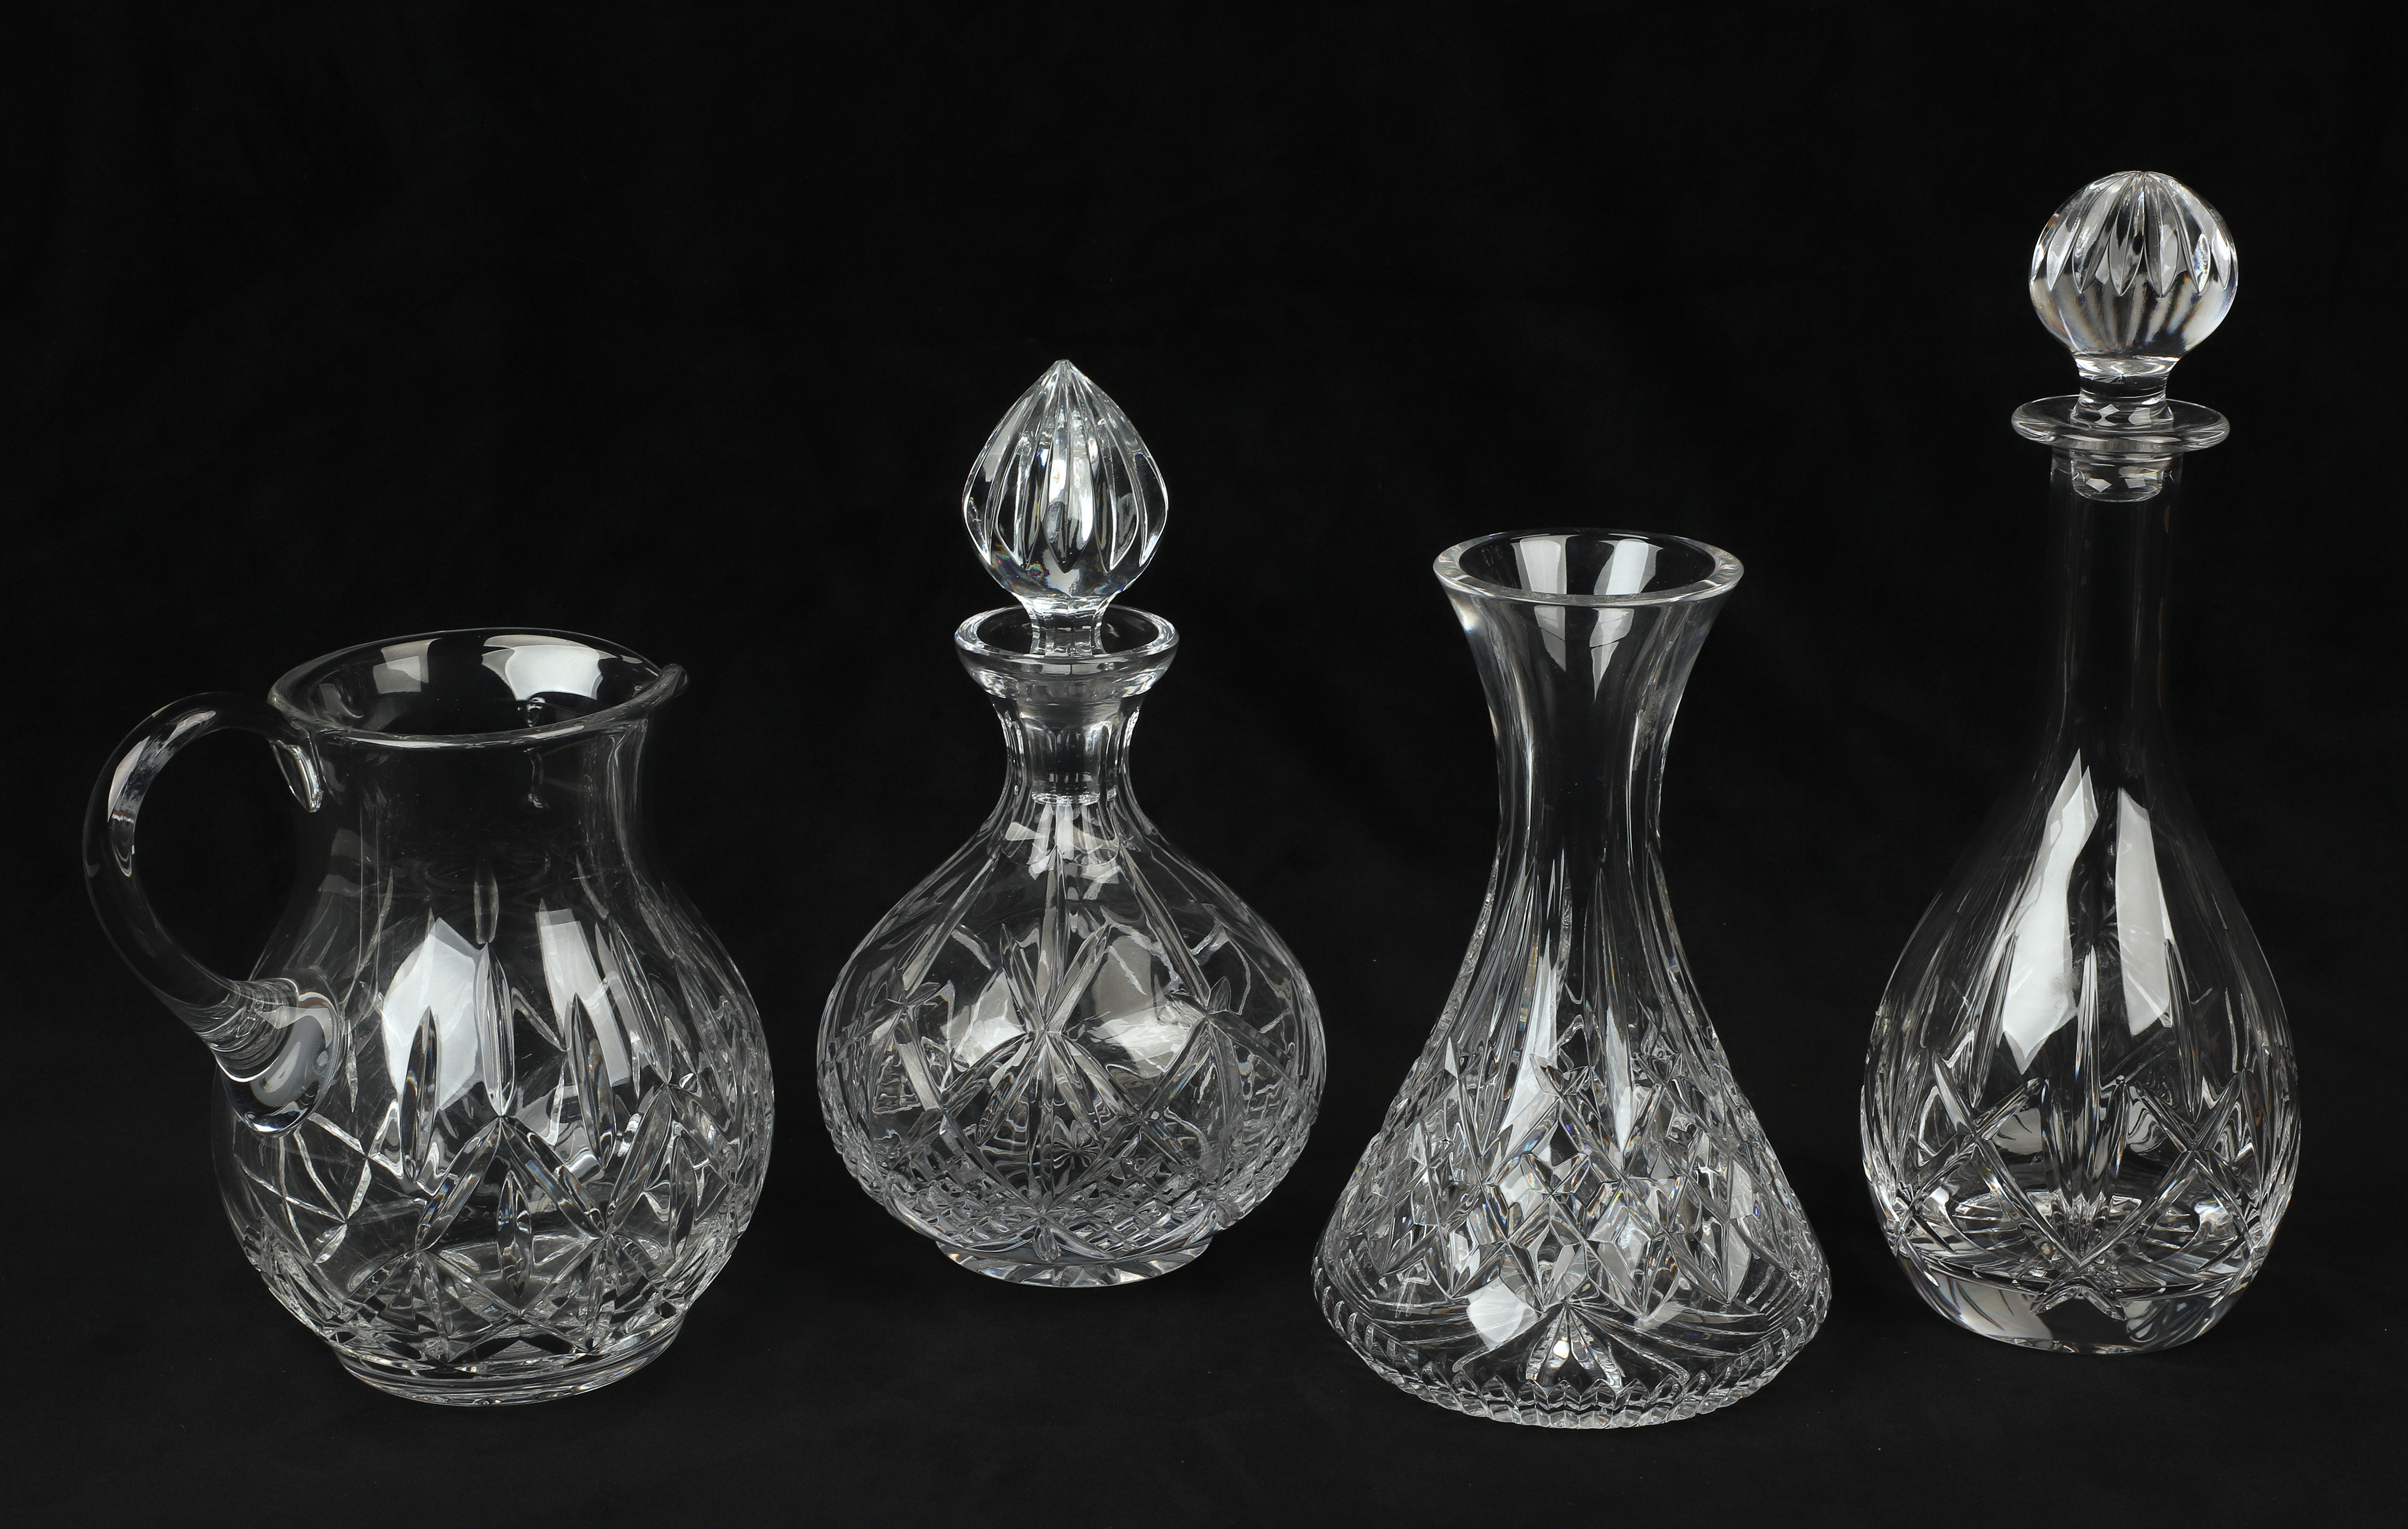  4 Waterford and style decanters 2e2380